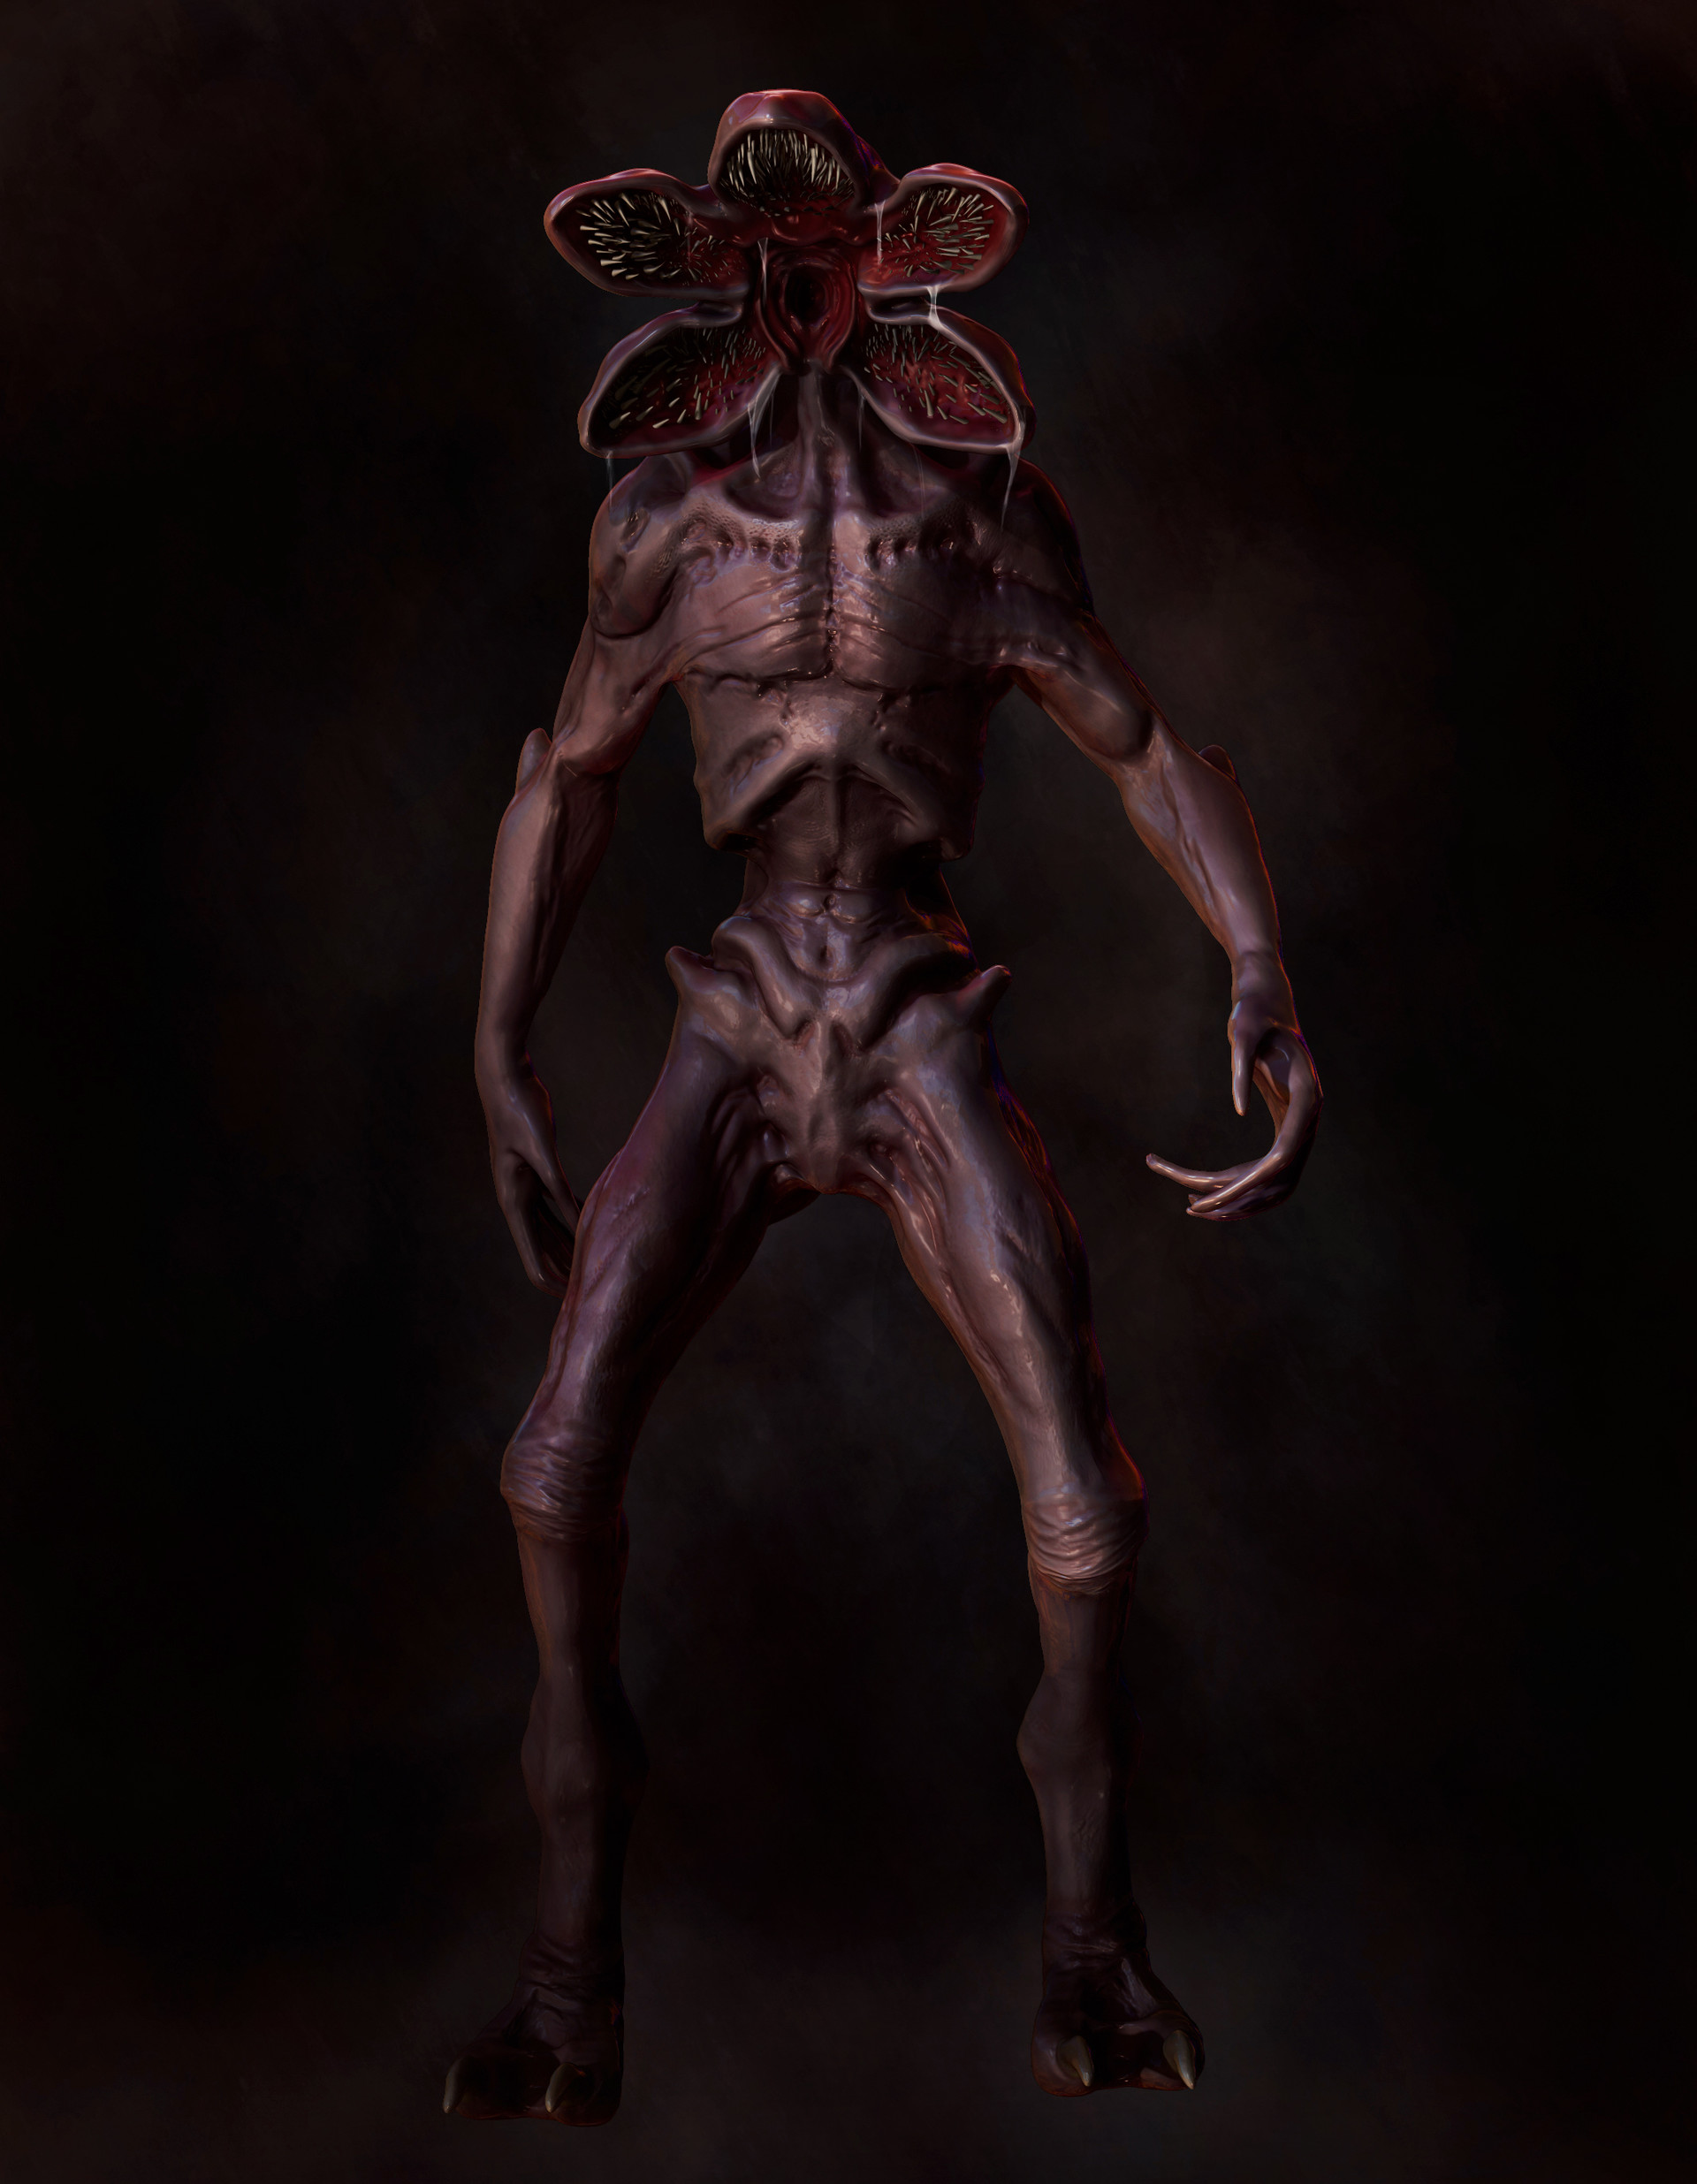 This is my version of the Demogorgon from Stranger Things. 